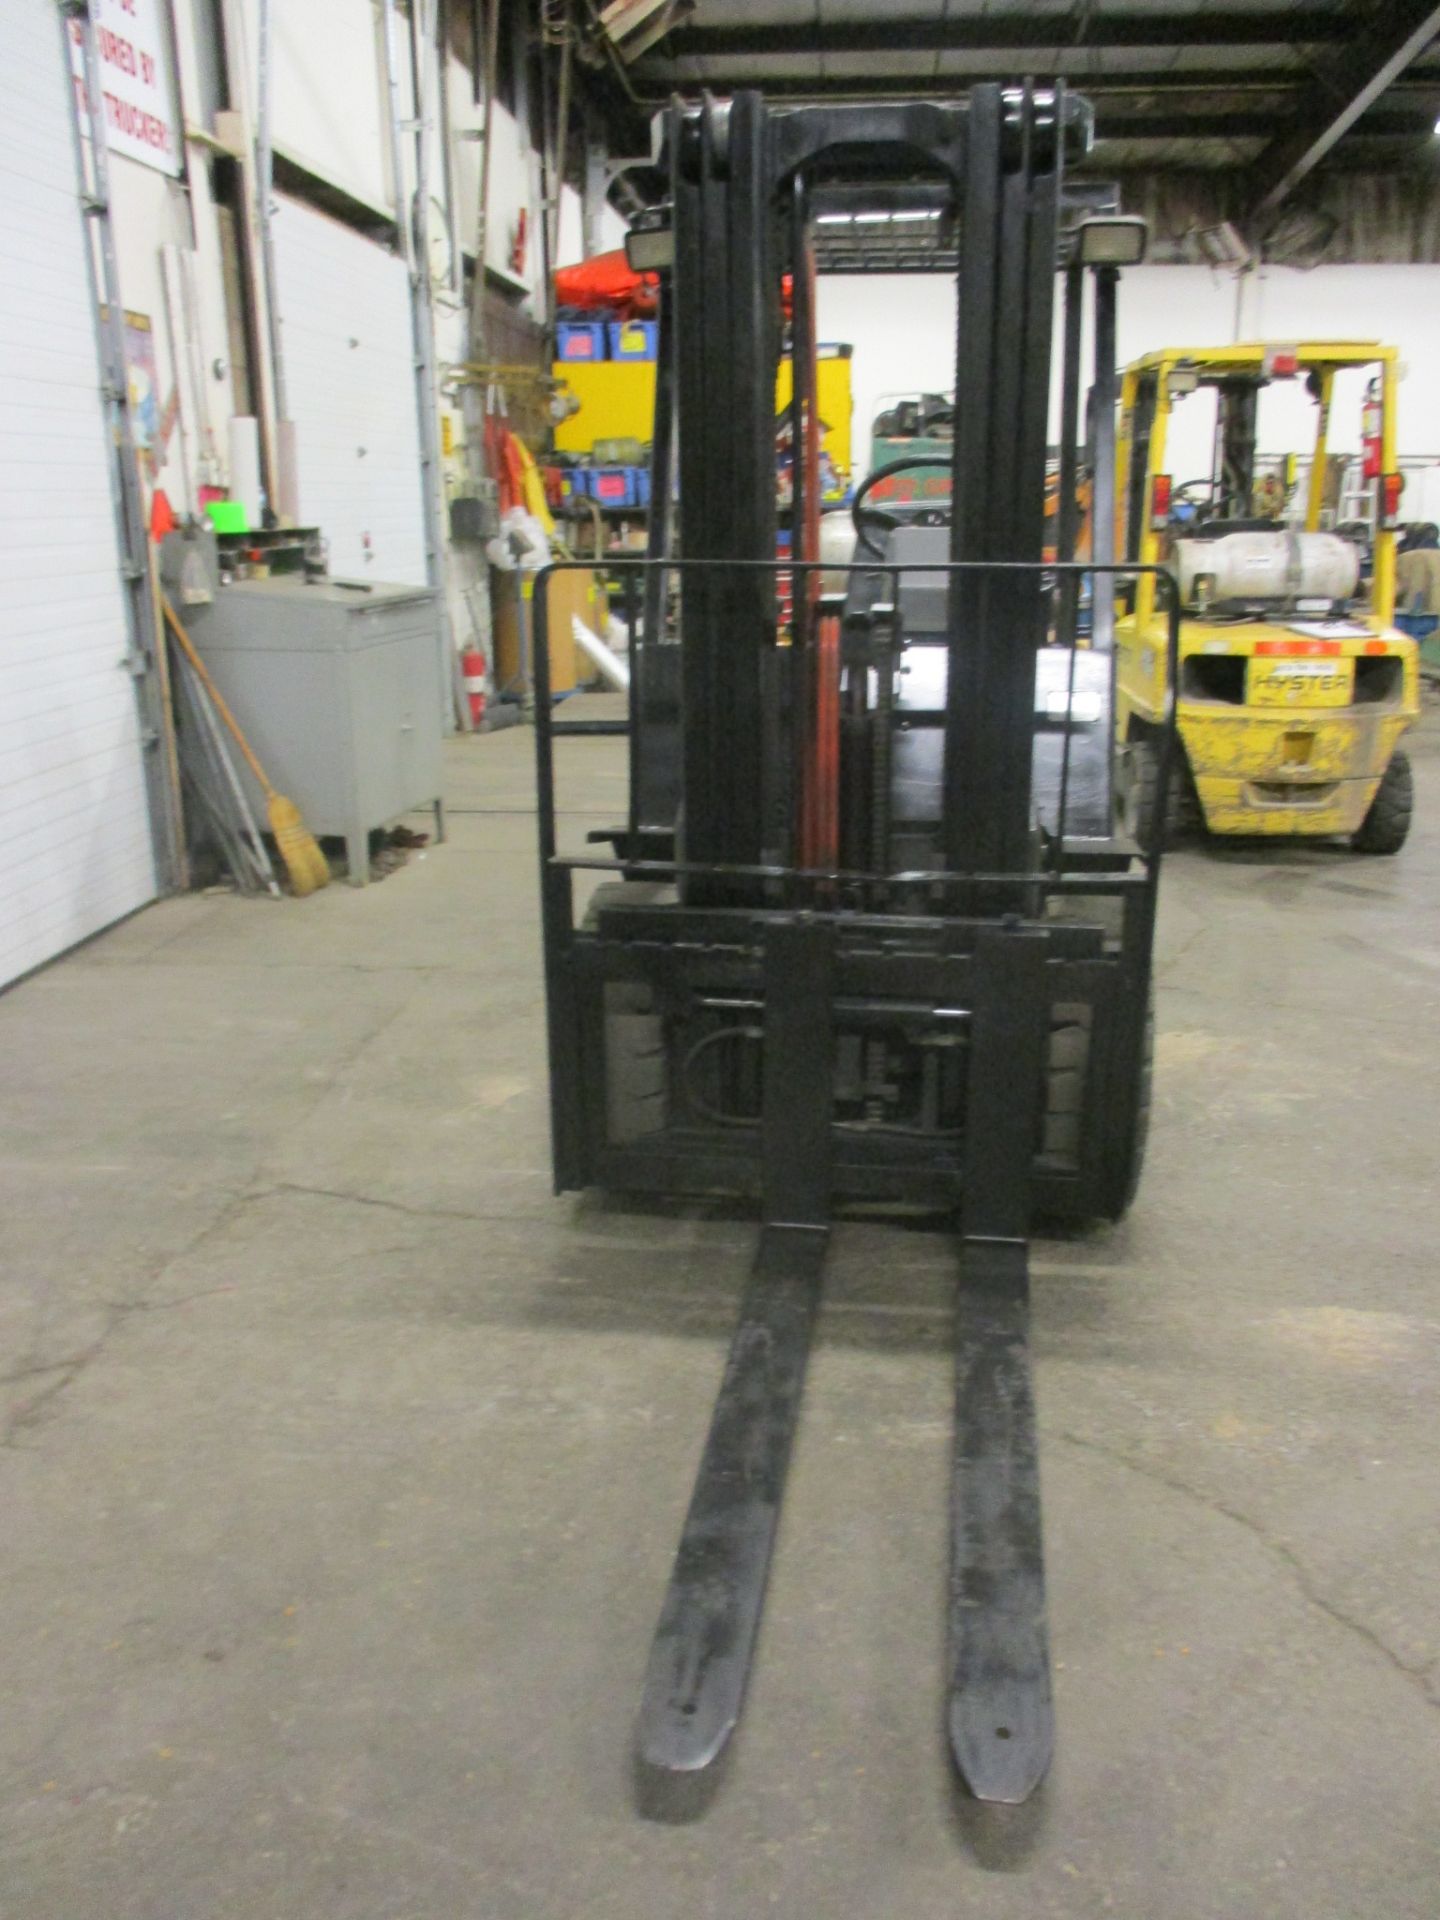 Yale 5500lbs Capacity OUTDOOR Forklift - LPG (propane) with 3-stage mast & sideshift - Image 2 of 2